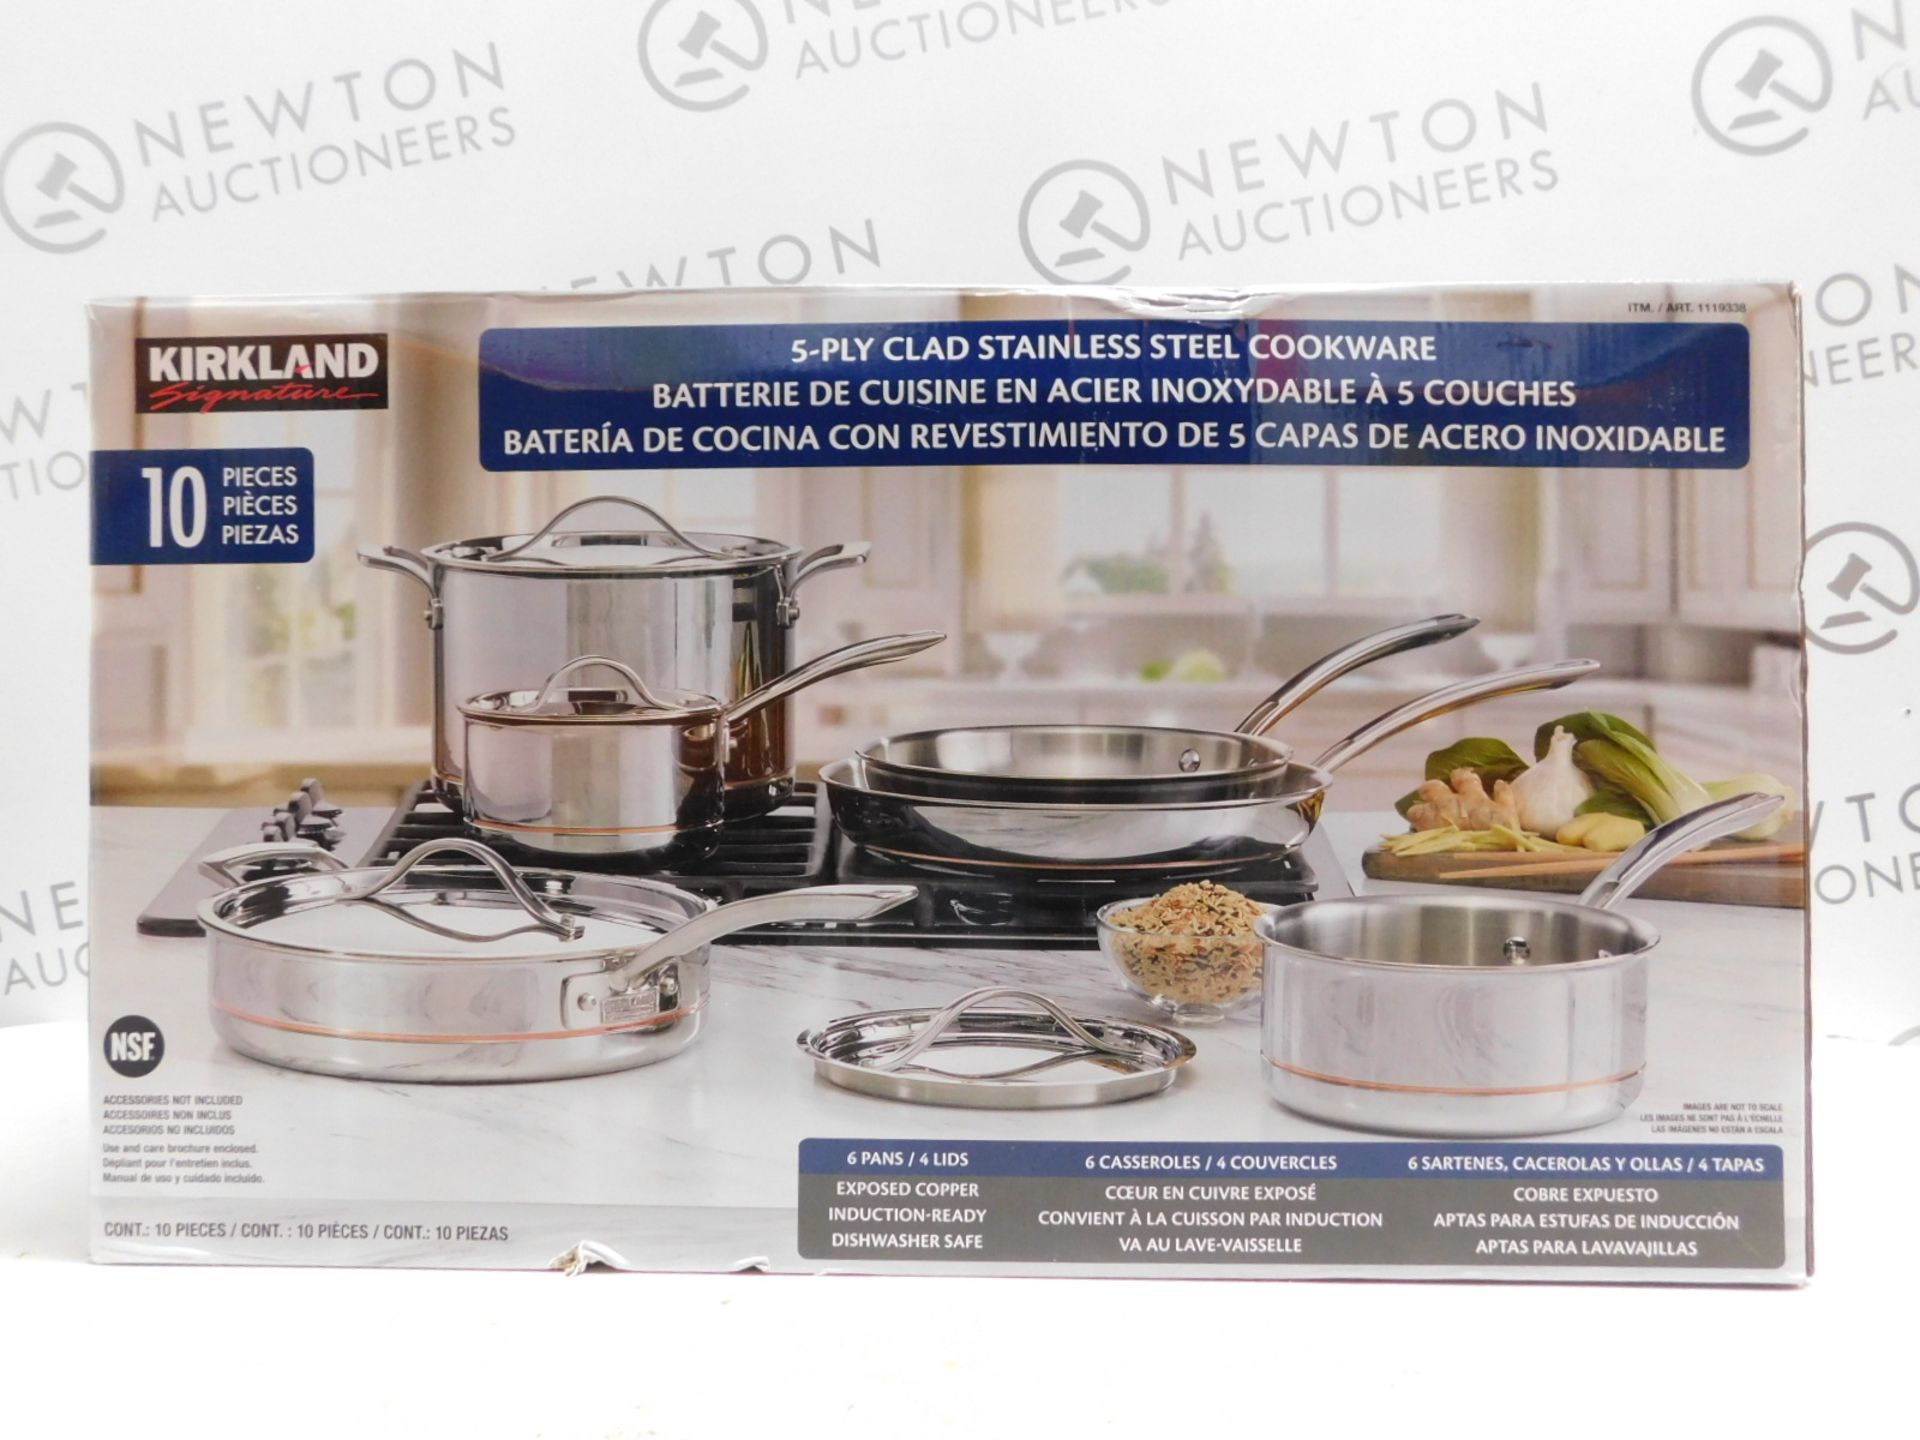 1 BOXED KIRKLAND SIGNATURE 10 PIECE STAINLESS STEEL COOKWARE SET RRP £299.99